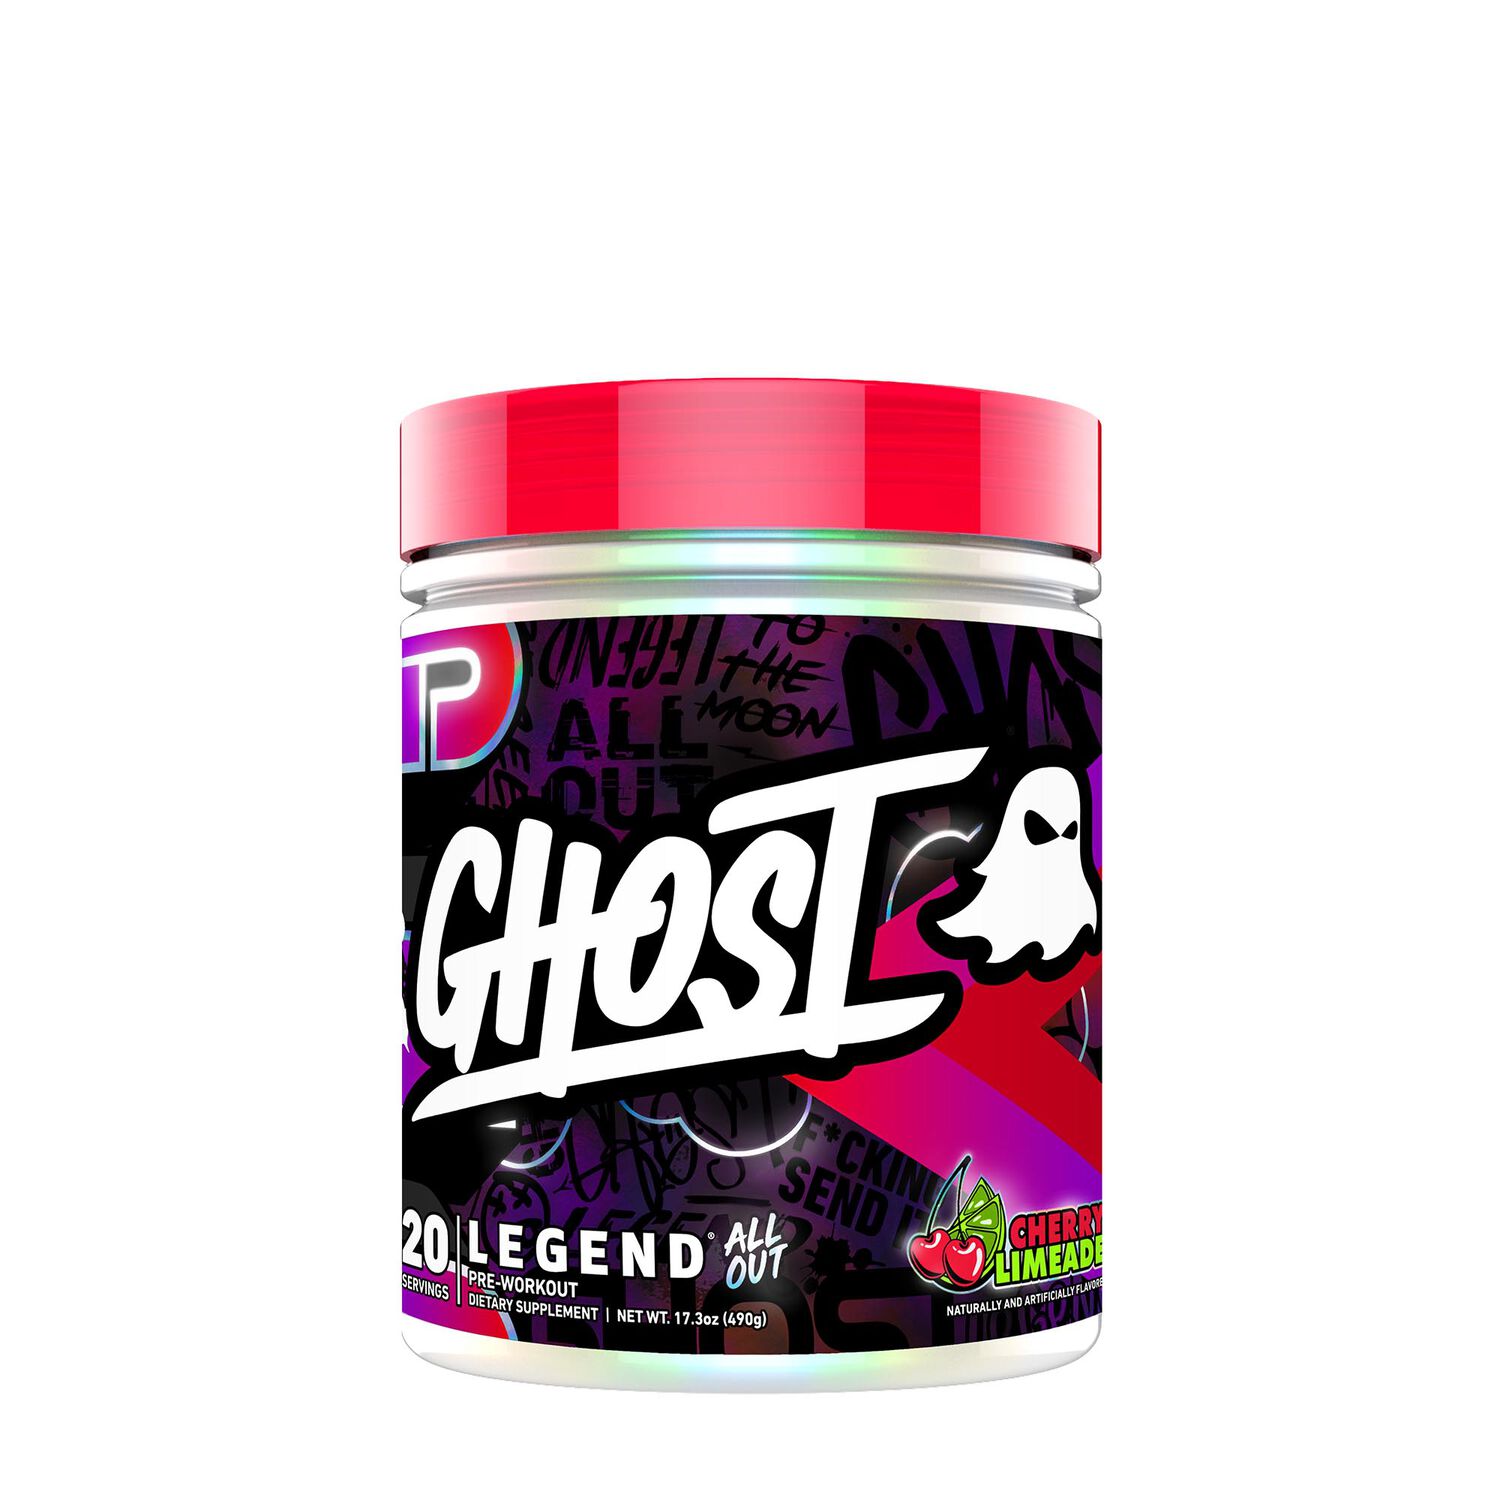 All-New Ghost Hydration! 💦 - Protein Package